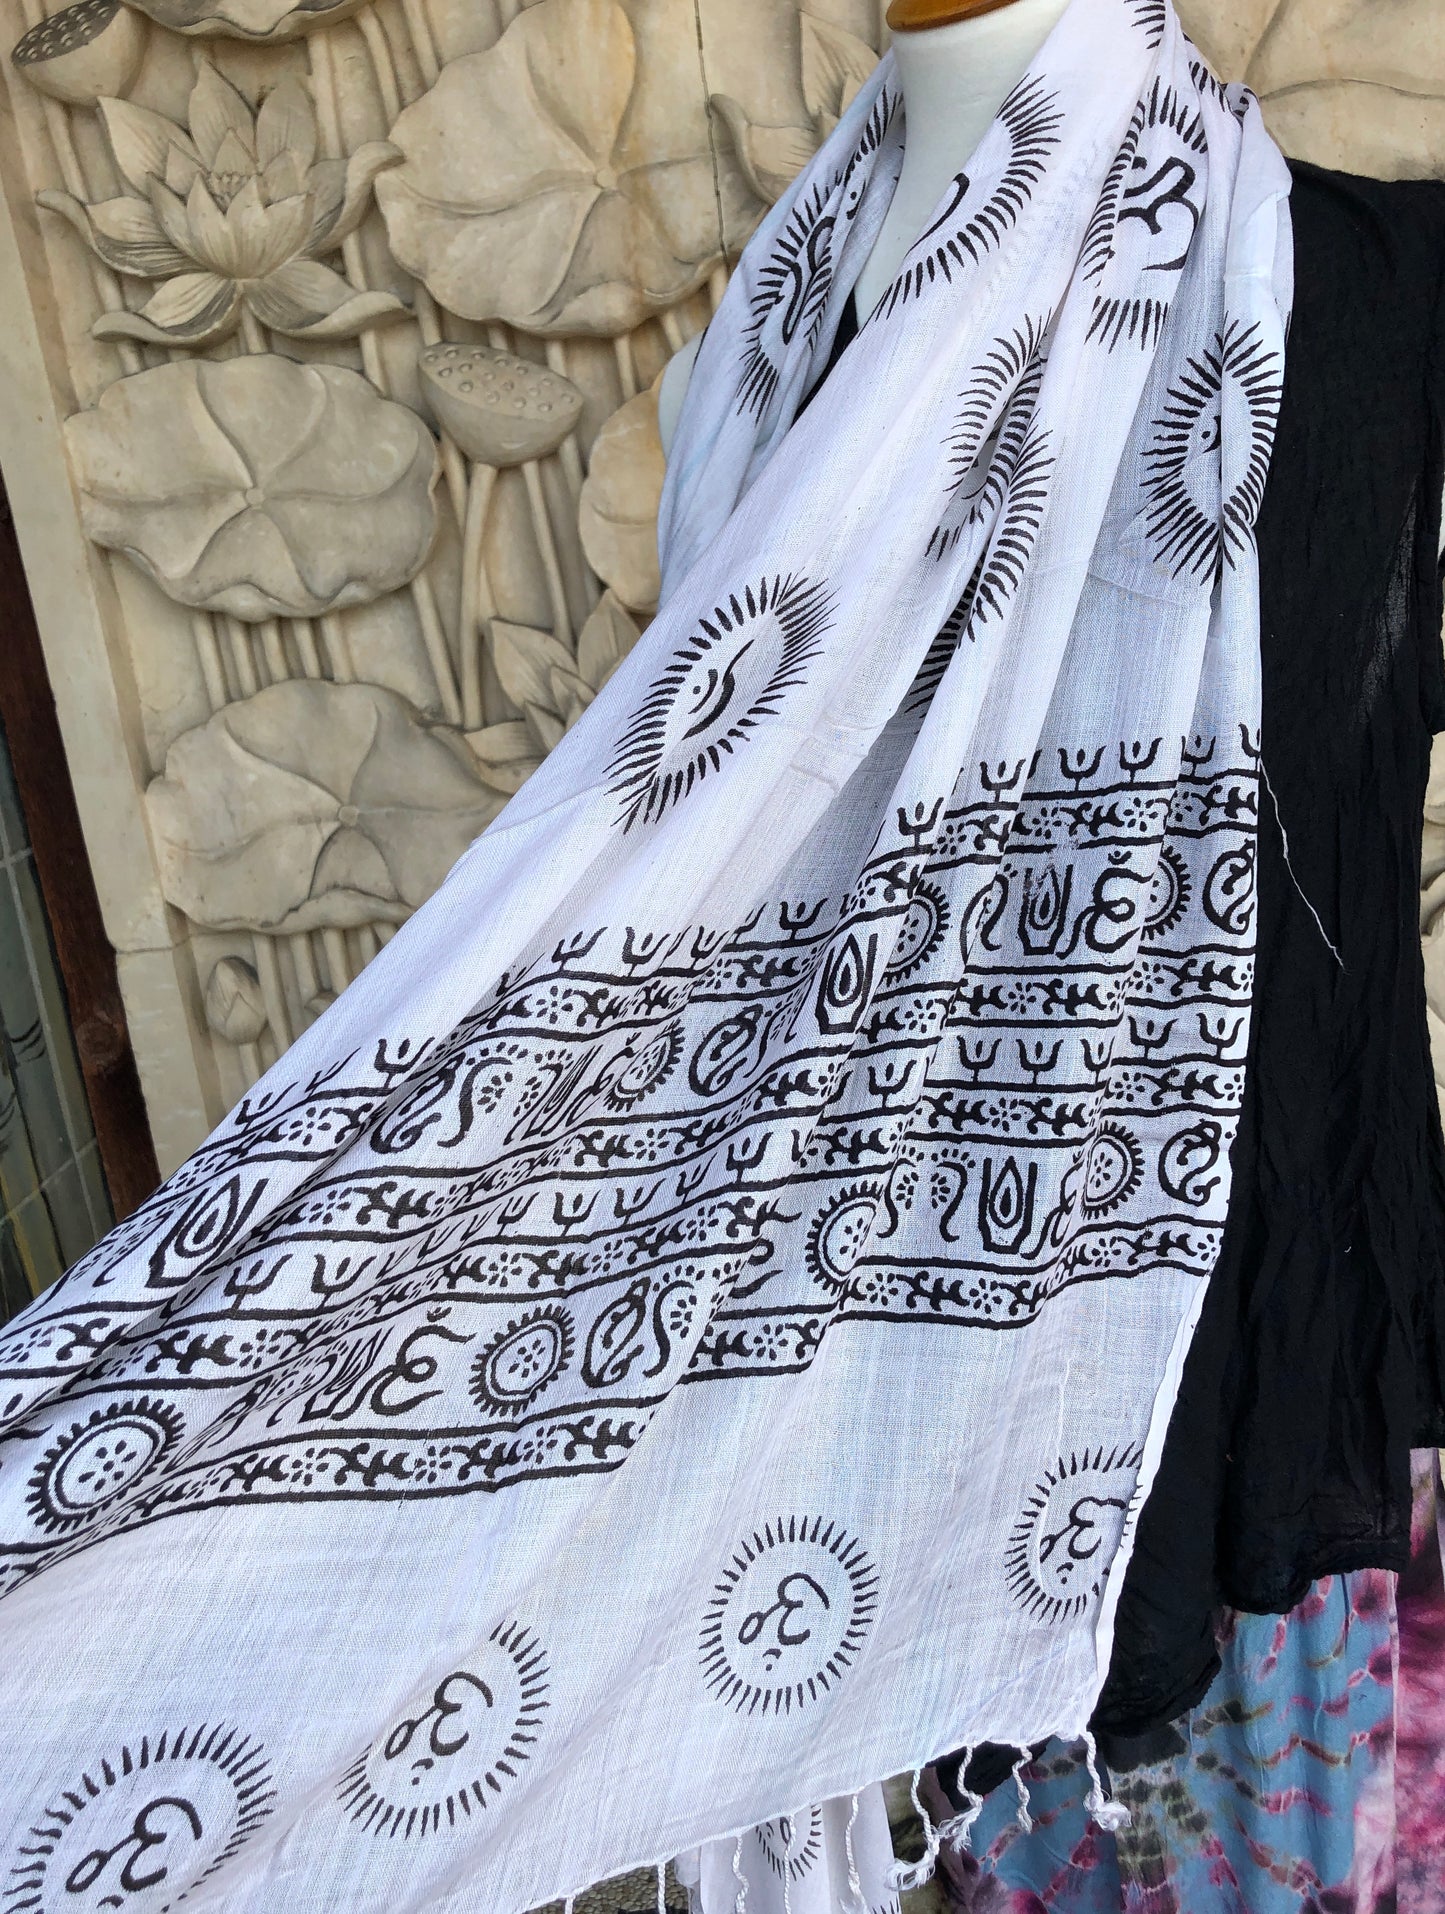 Light Rayon Prayer Scarves w Mantras and fringe 11 Colors